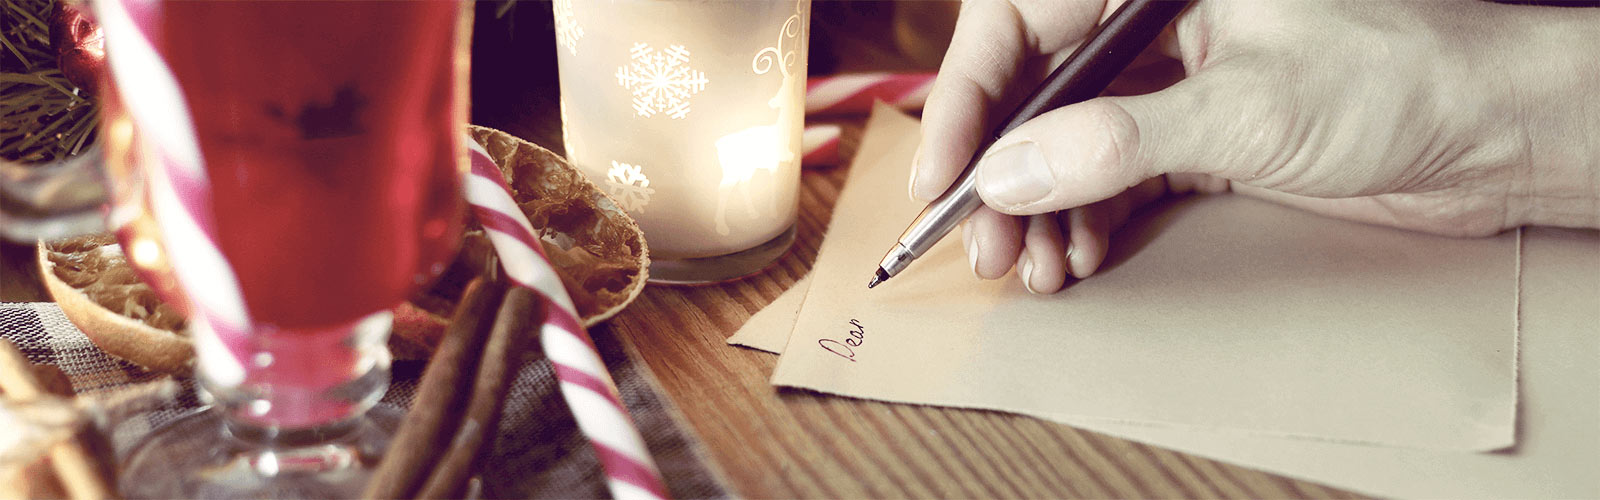 Someone writing a letter beside holiday decorations, including a candy cane and a candle.